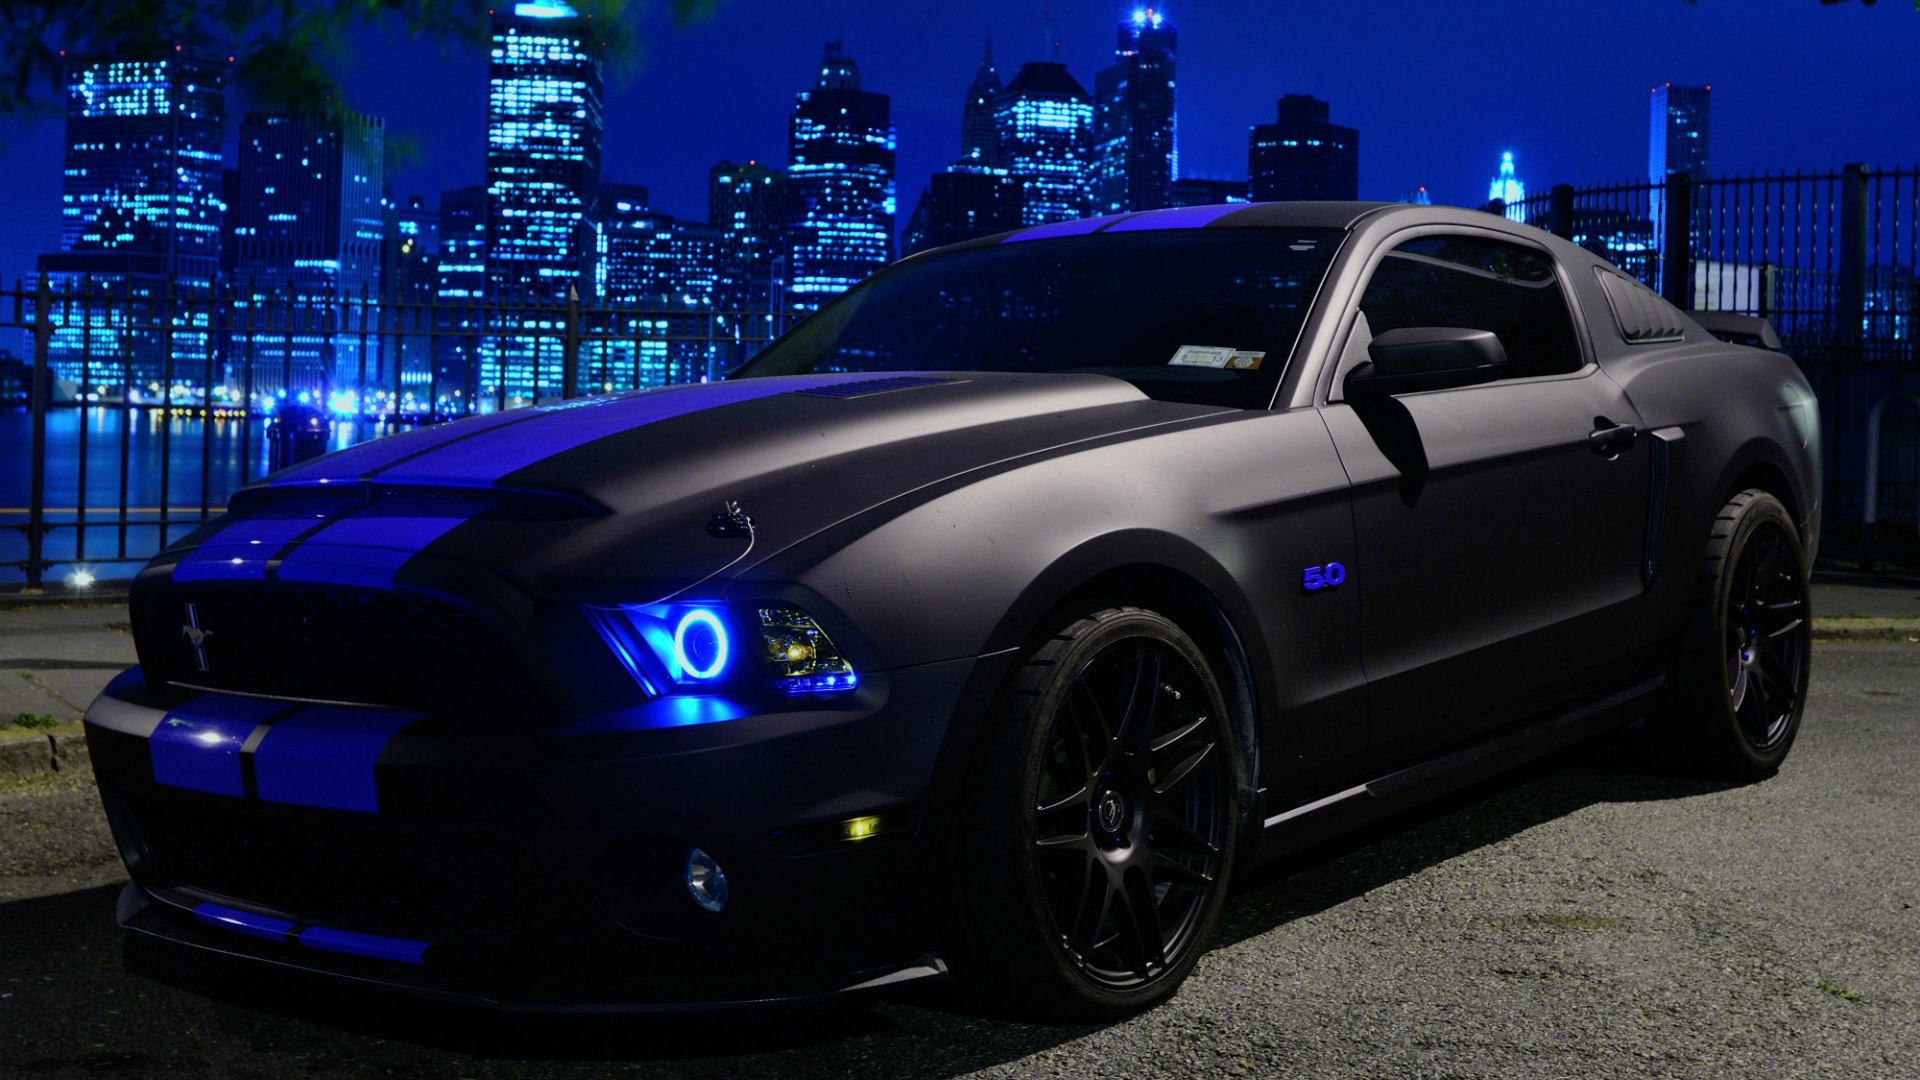 Ford Mustang HD Wallpaper Picture Image